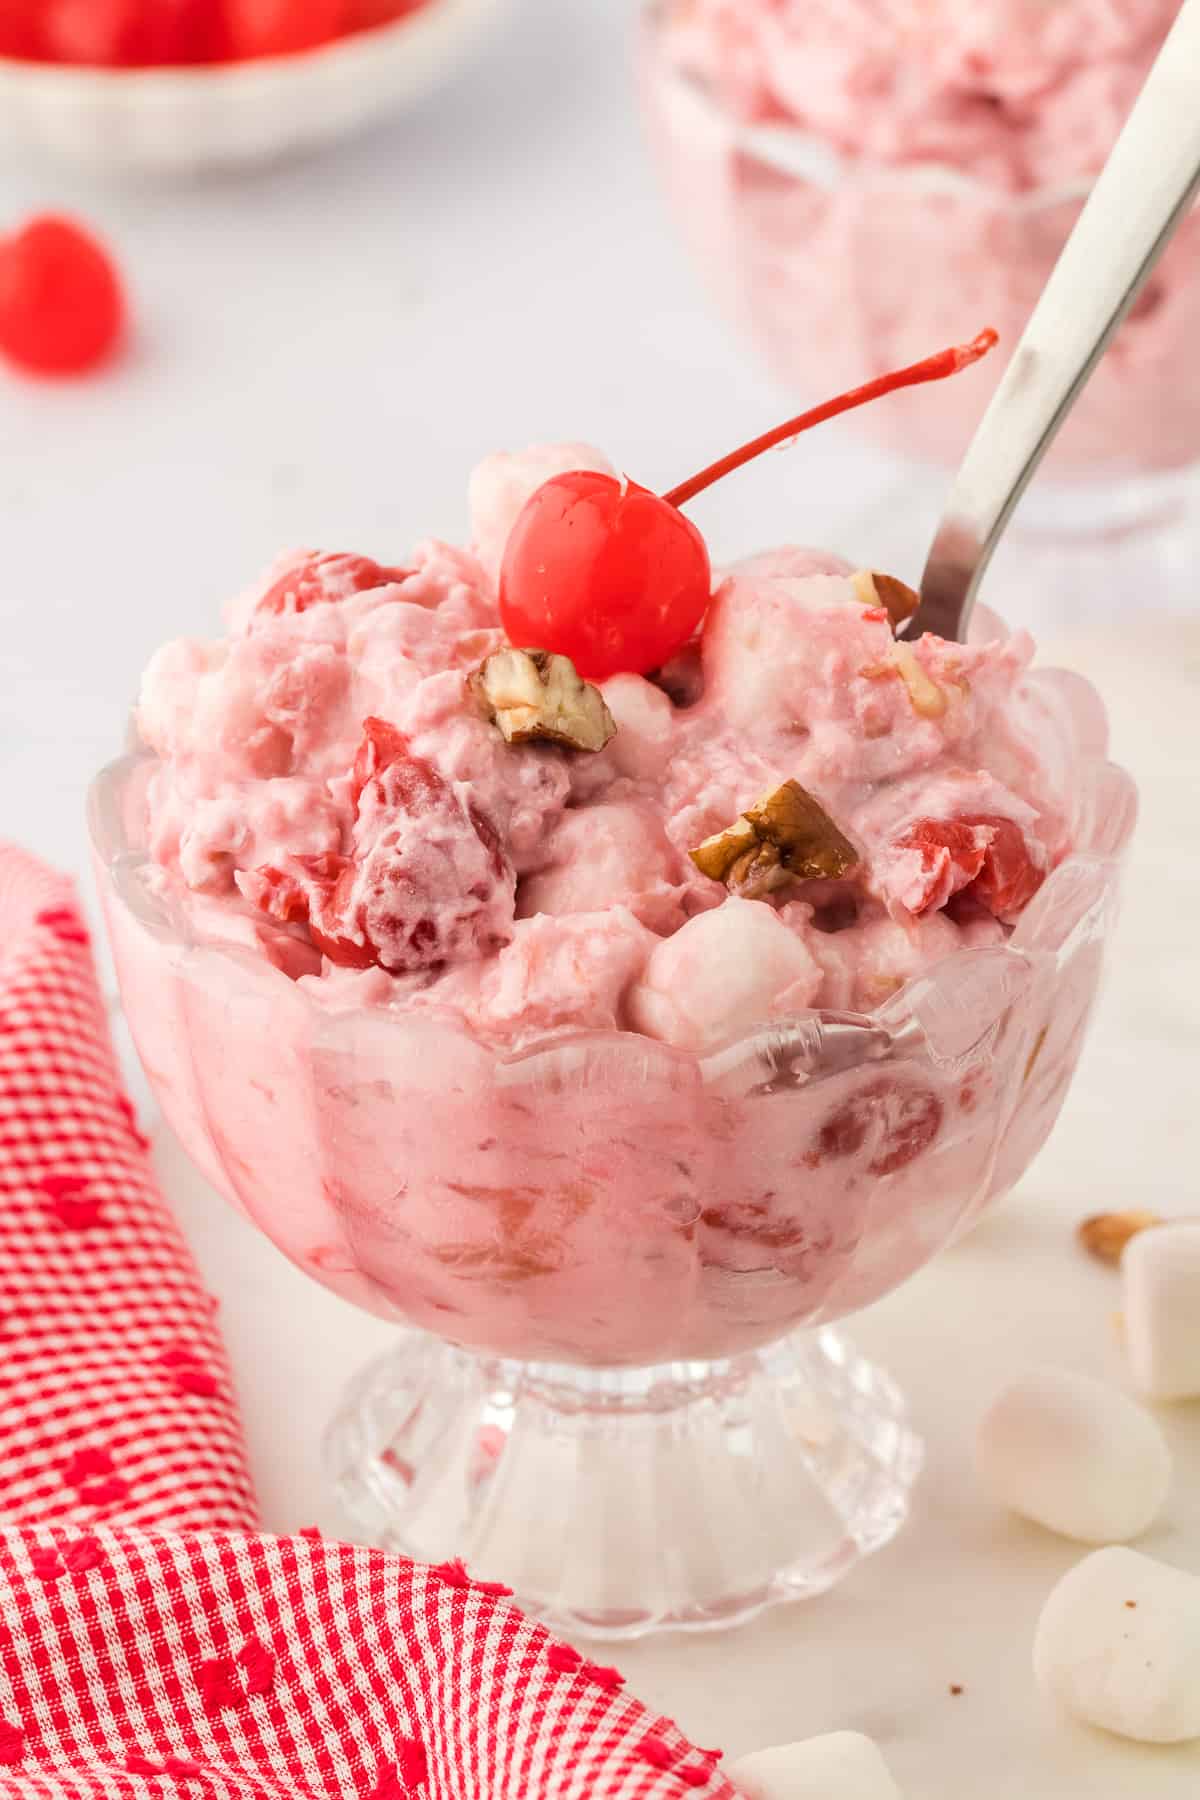 a glass bowl of cherry fluff topped with a maraschino cherry and a spoon stuck into it, with more fluff in the background and a bowl of cherries in the background, a red and white kitchen towel to the left and mini marshmallows sprinkled around